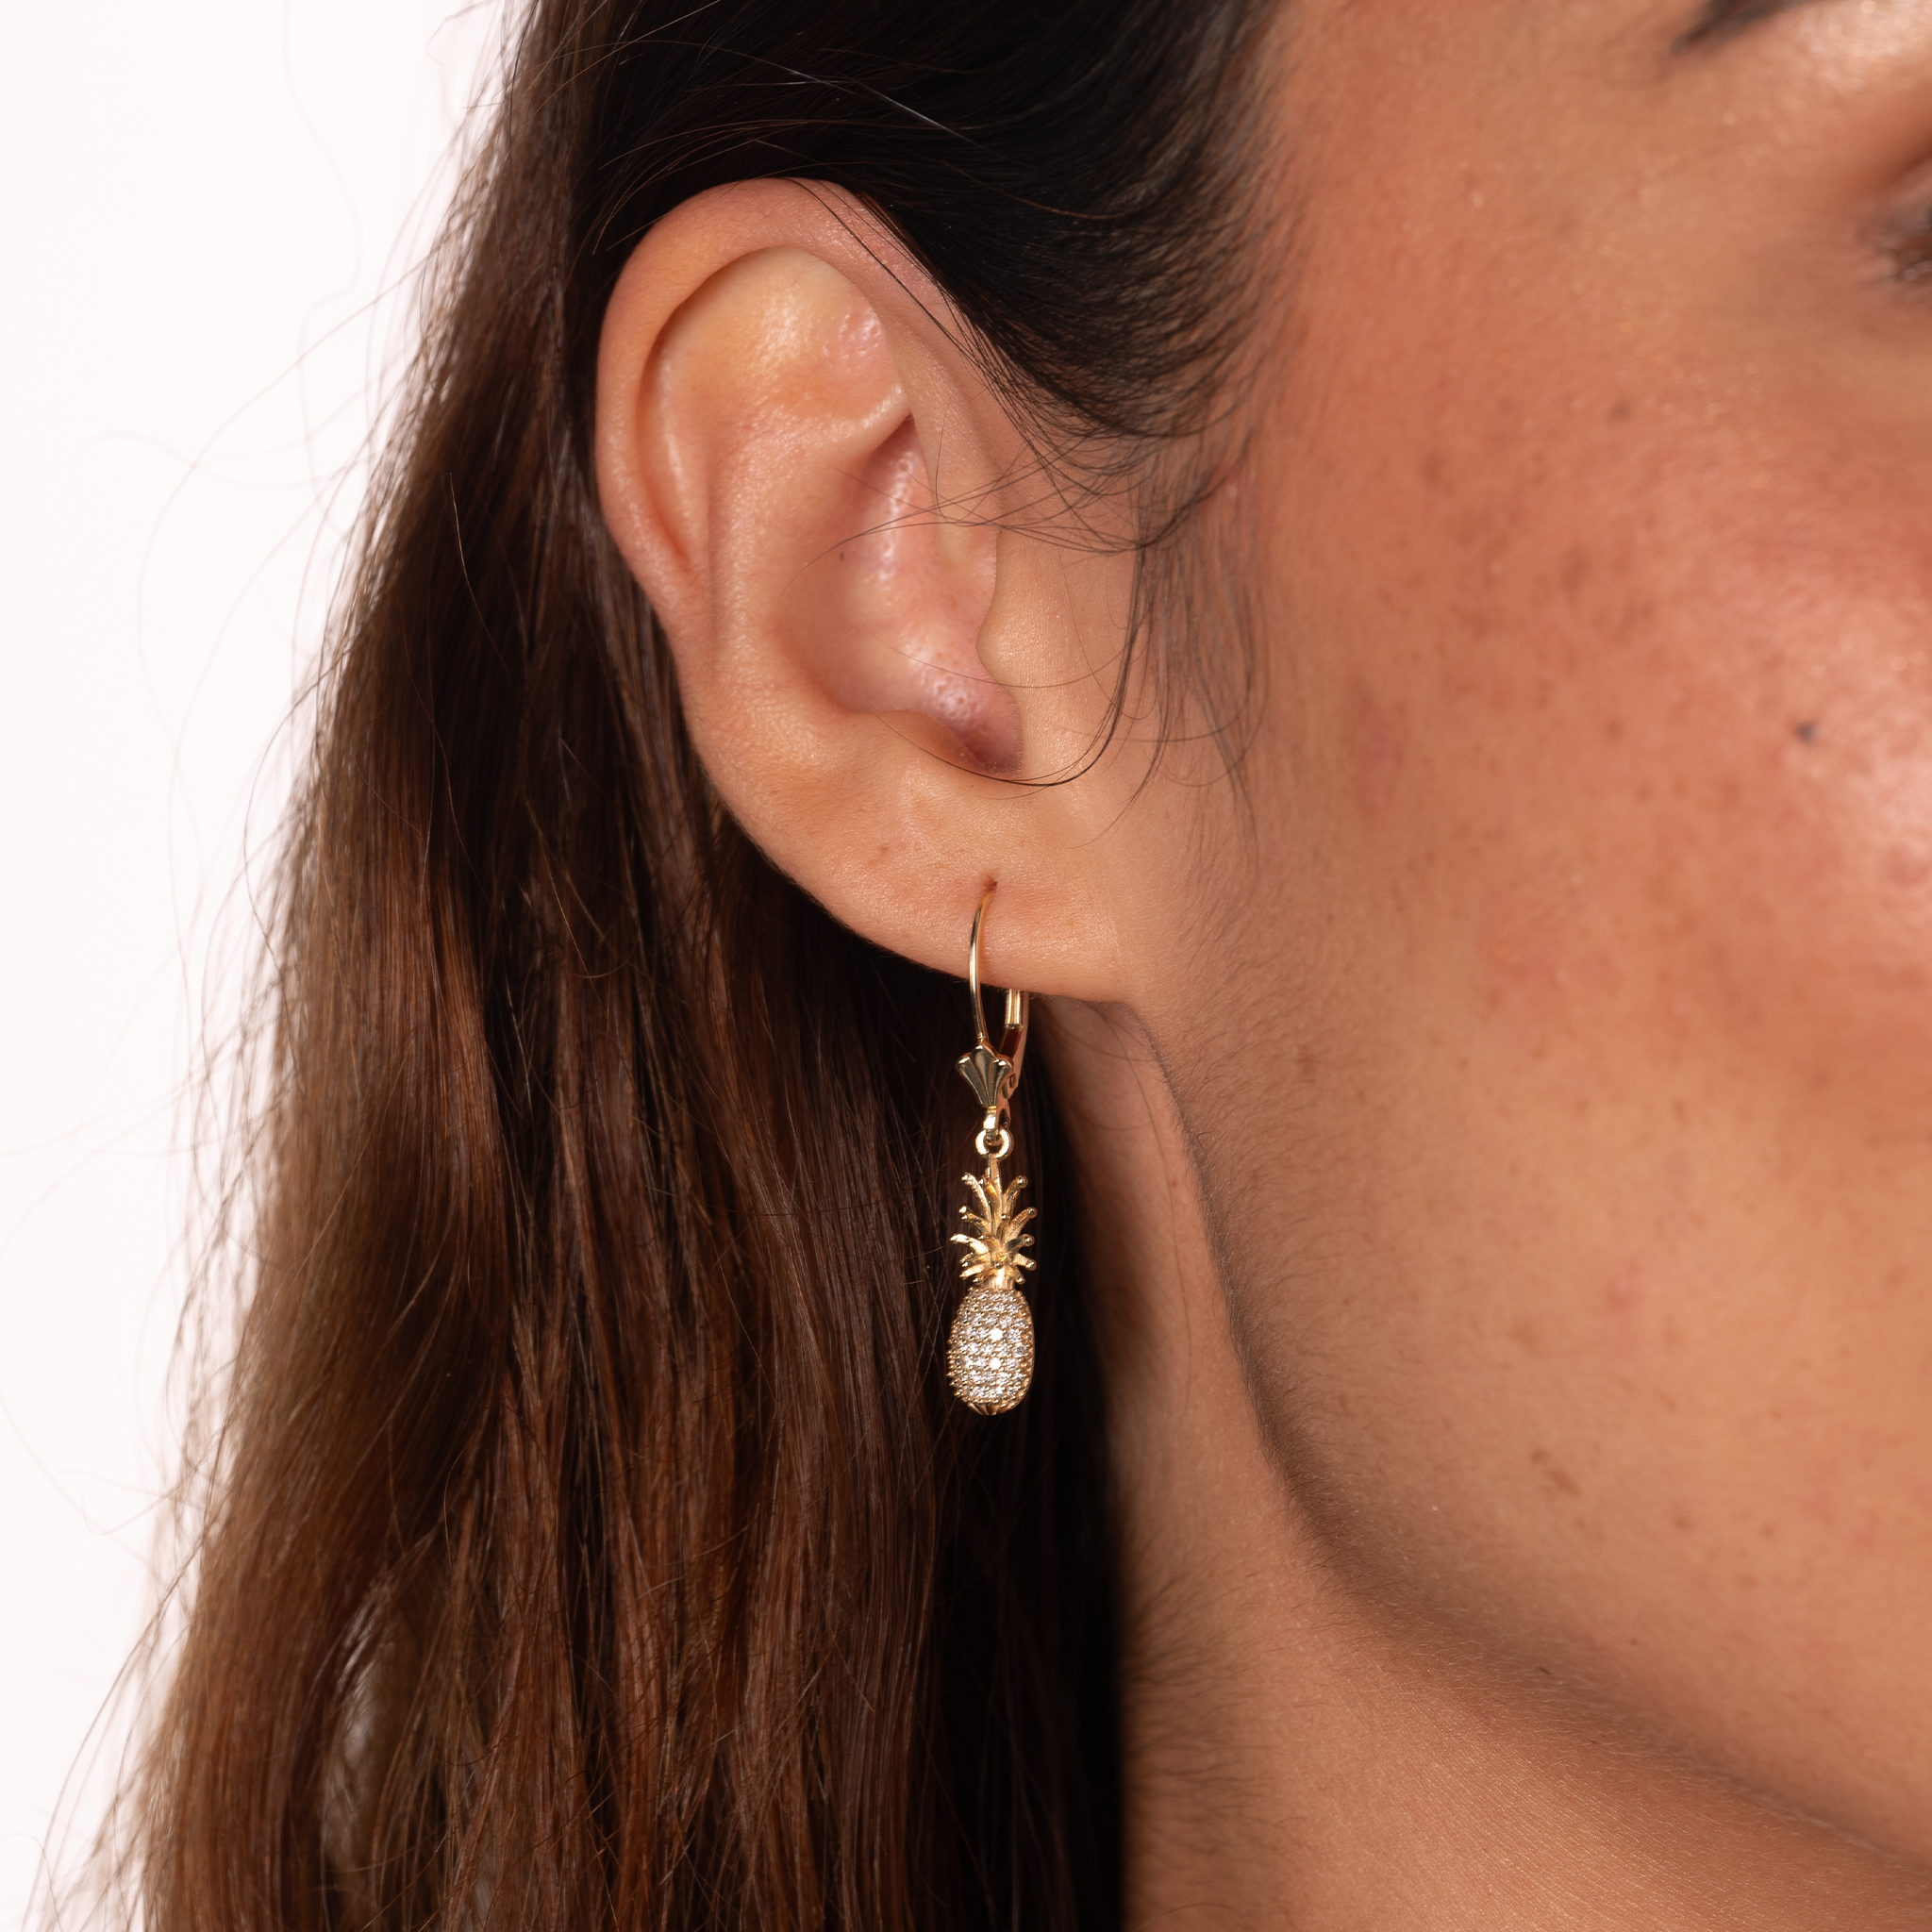 Pineapple Earrings in Gold with Diamonds